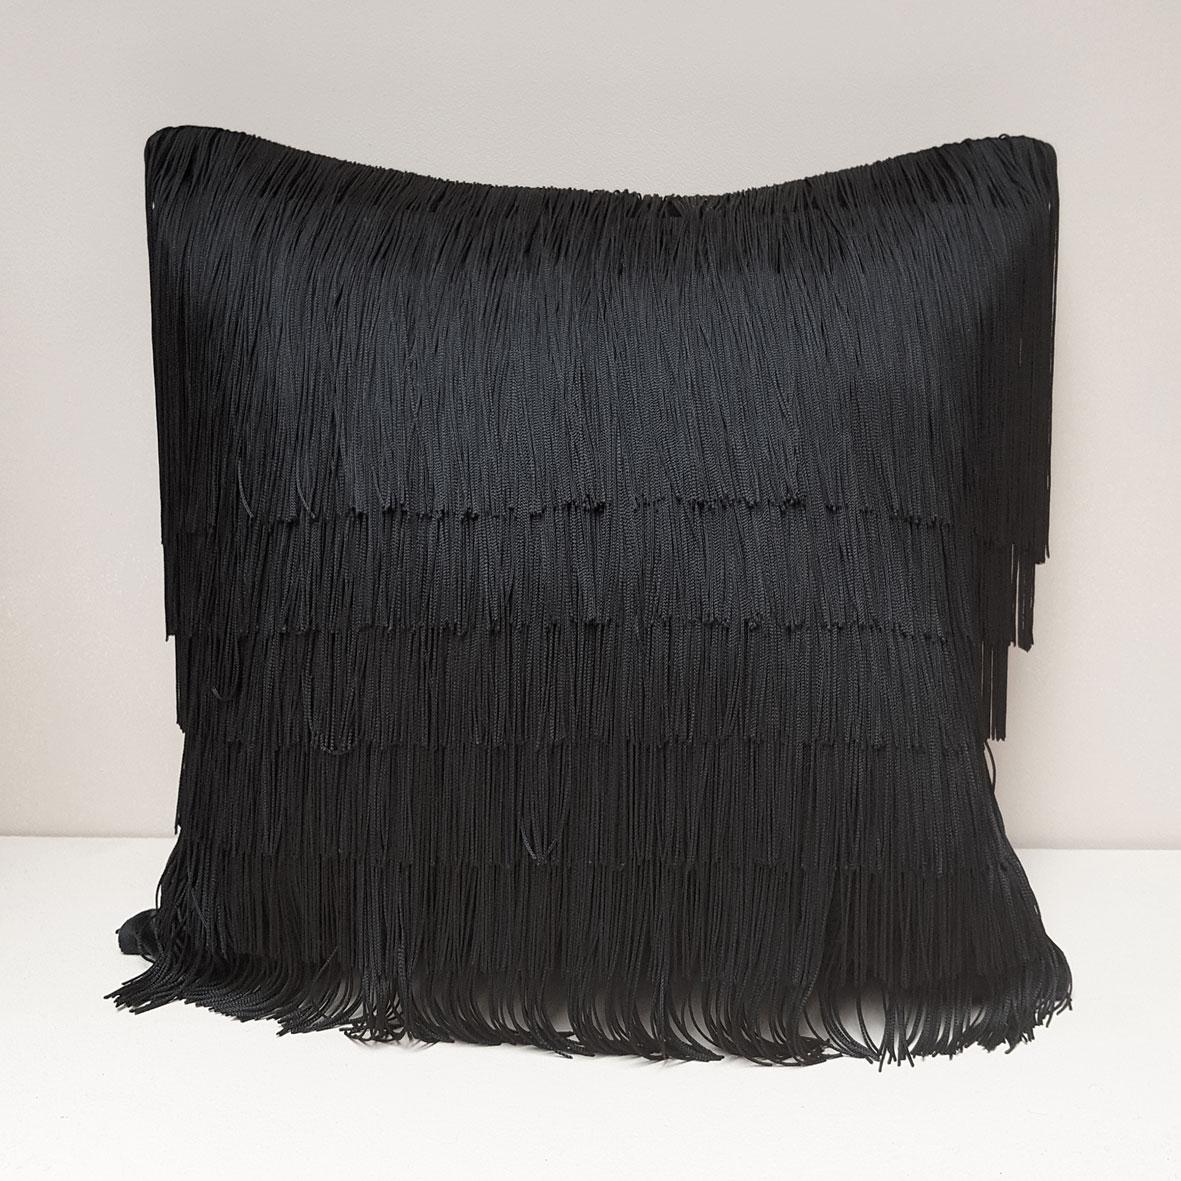 In a sumptuous black, our signature velvet tassel cushion will make the ultimate decorative statement in your home. Whether you’re a maximalist adding to your many layers of décor or a minimalist wanting to make an impact this cushion does the